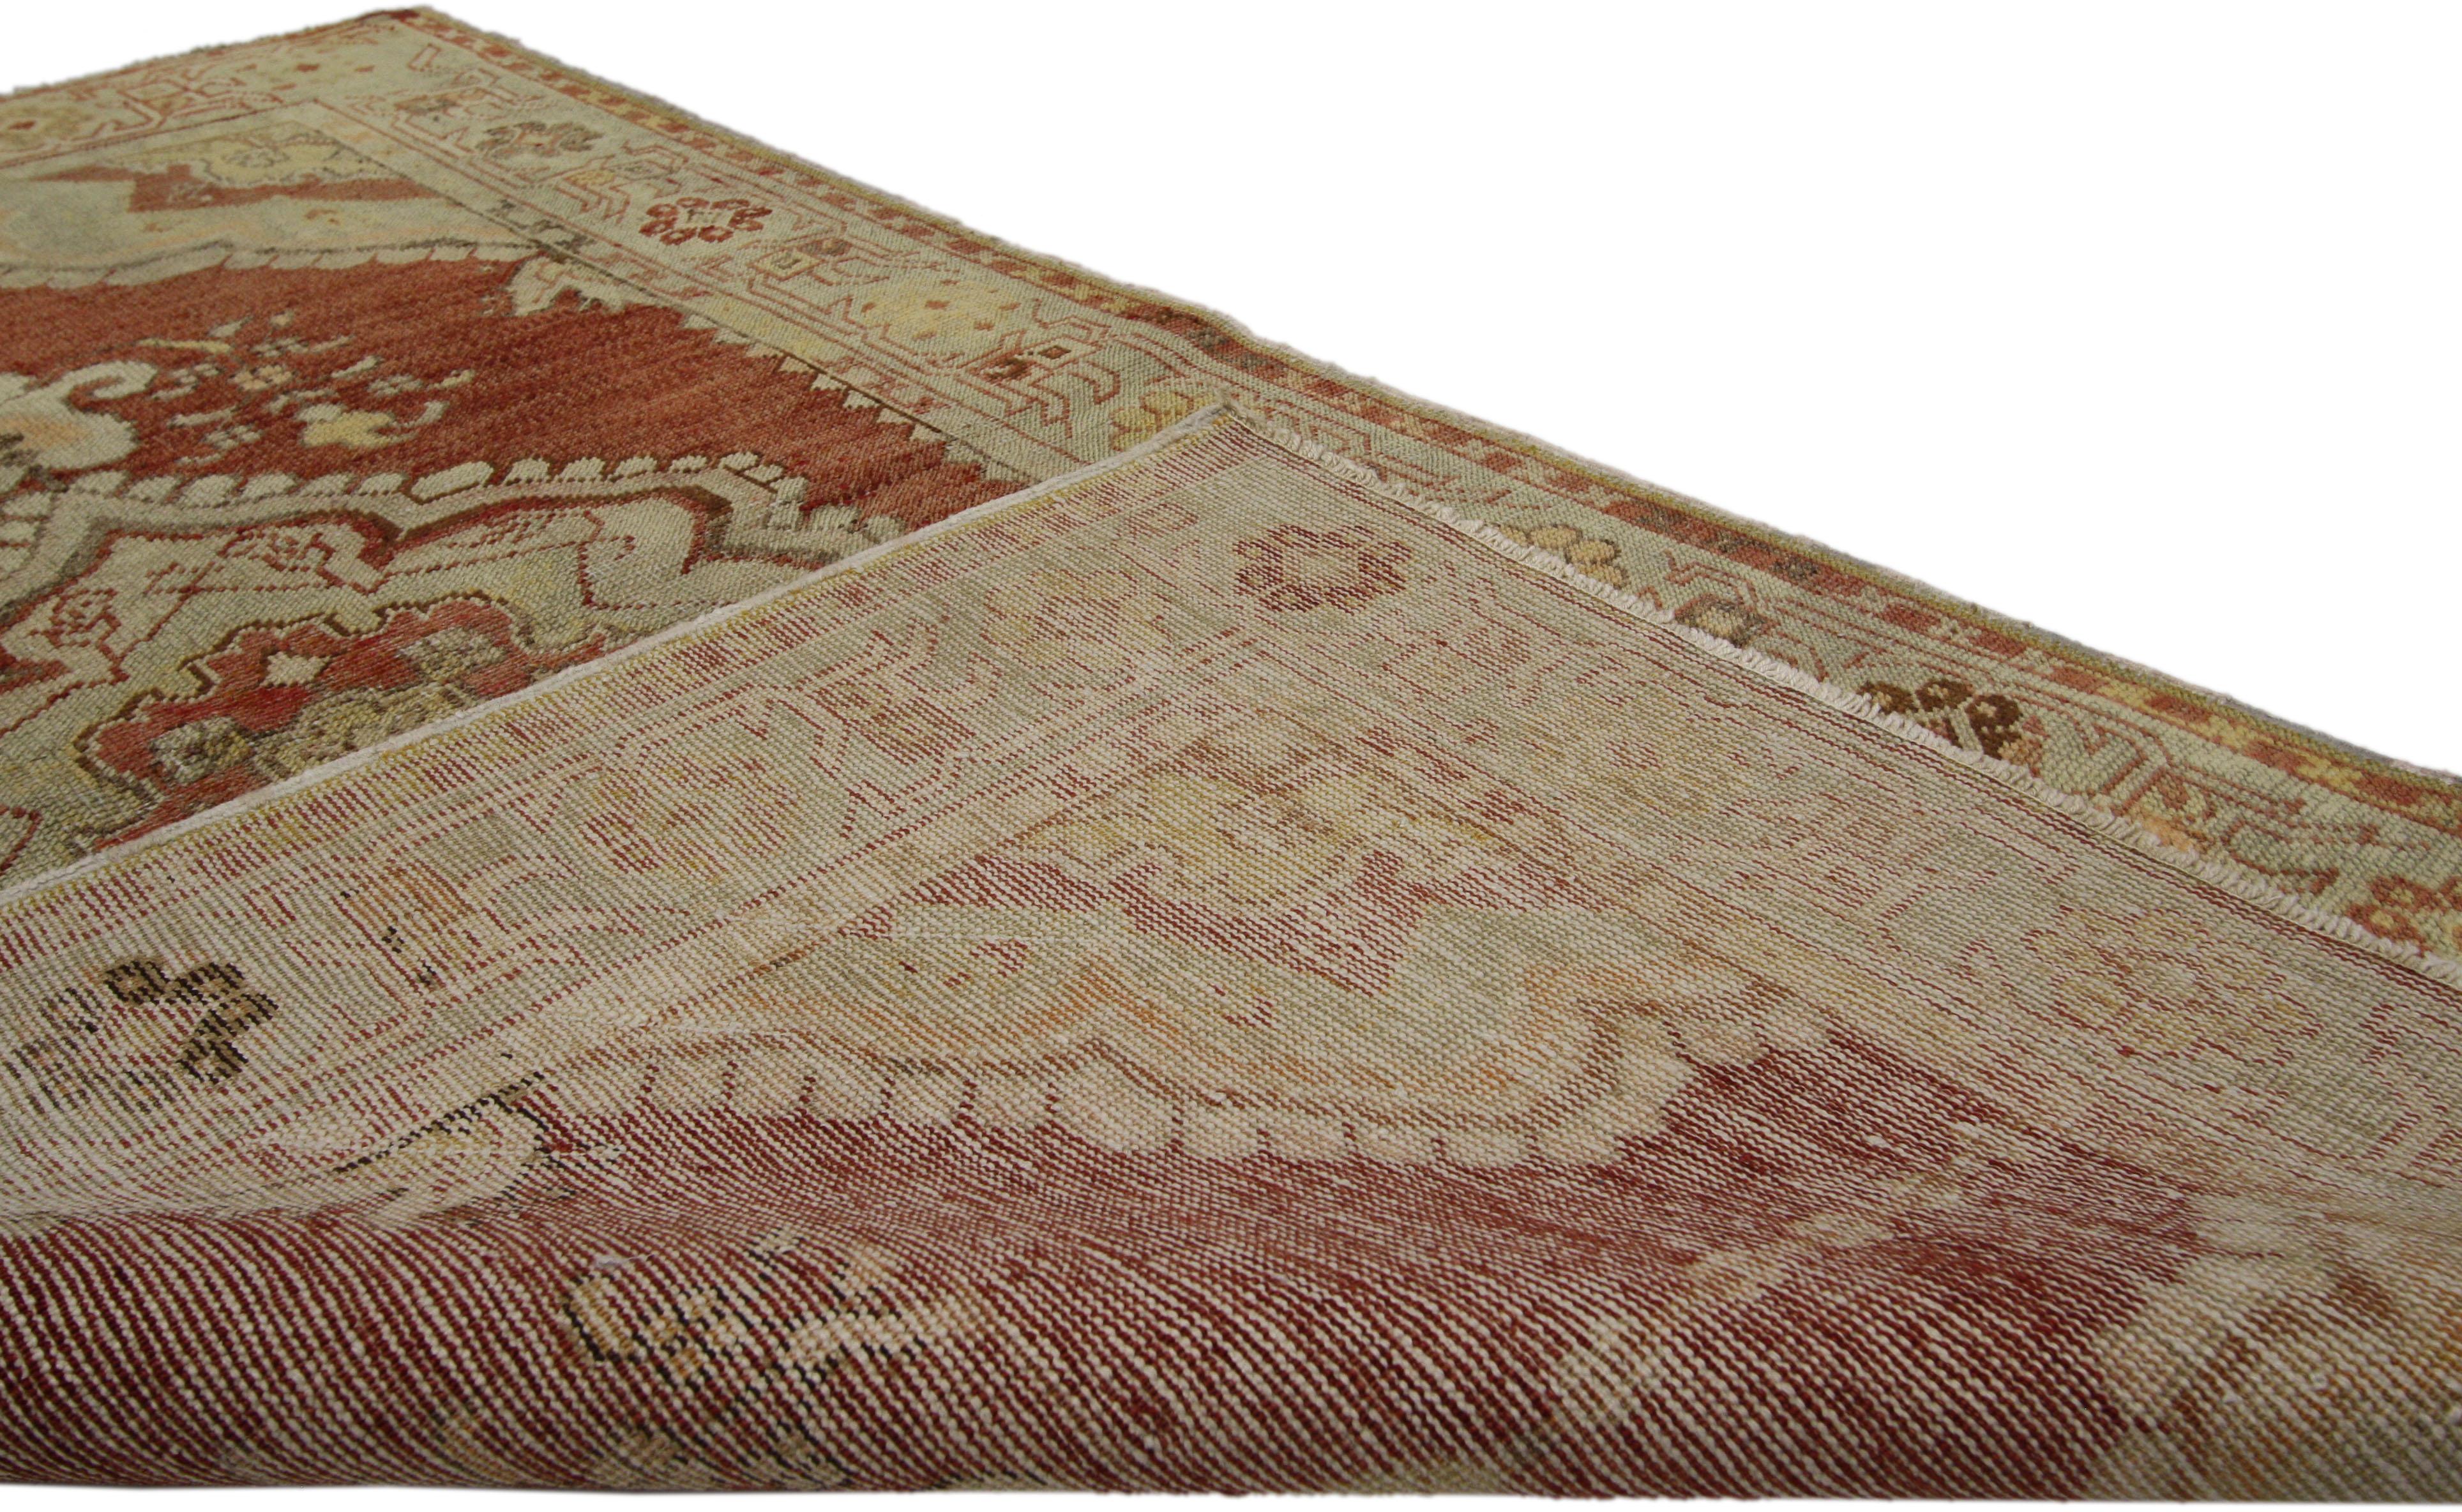 Vintage Turkish Oushak Accent Rug with Modern Rustic Spanish Colonial Style In Good Condition For Sale In Dallas, TX